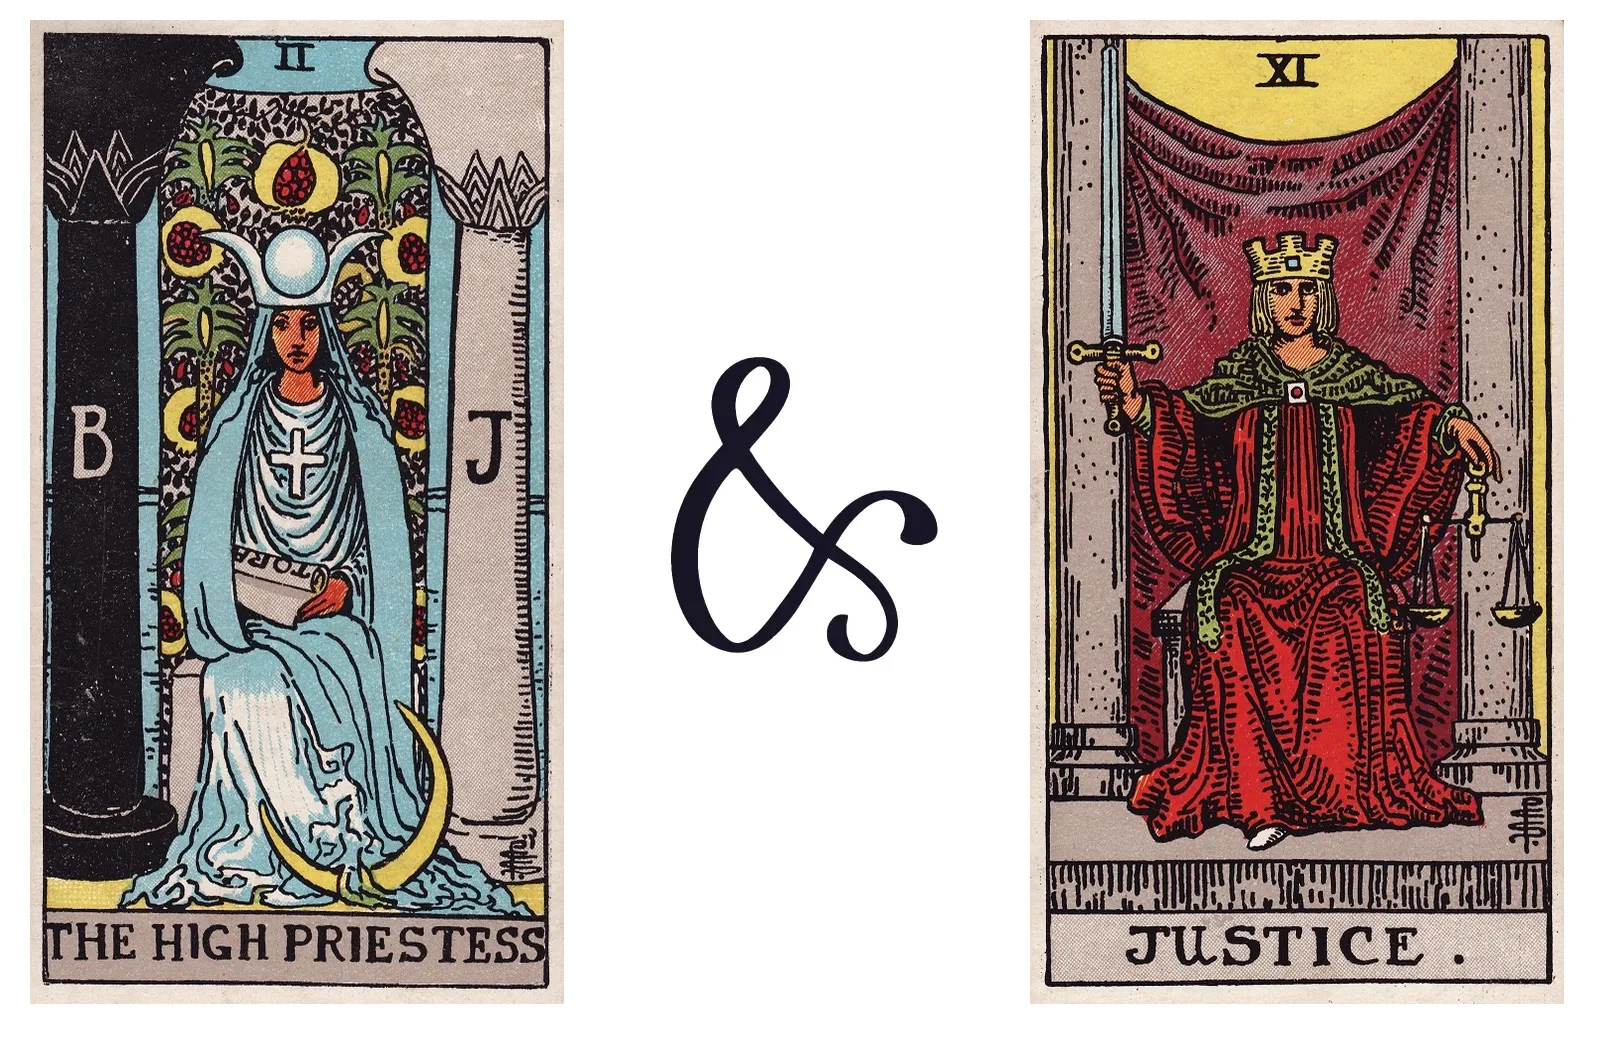 The High Priestess and Justice